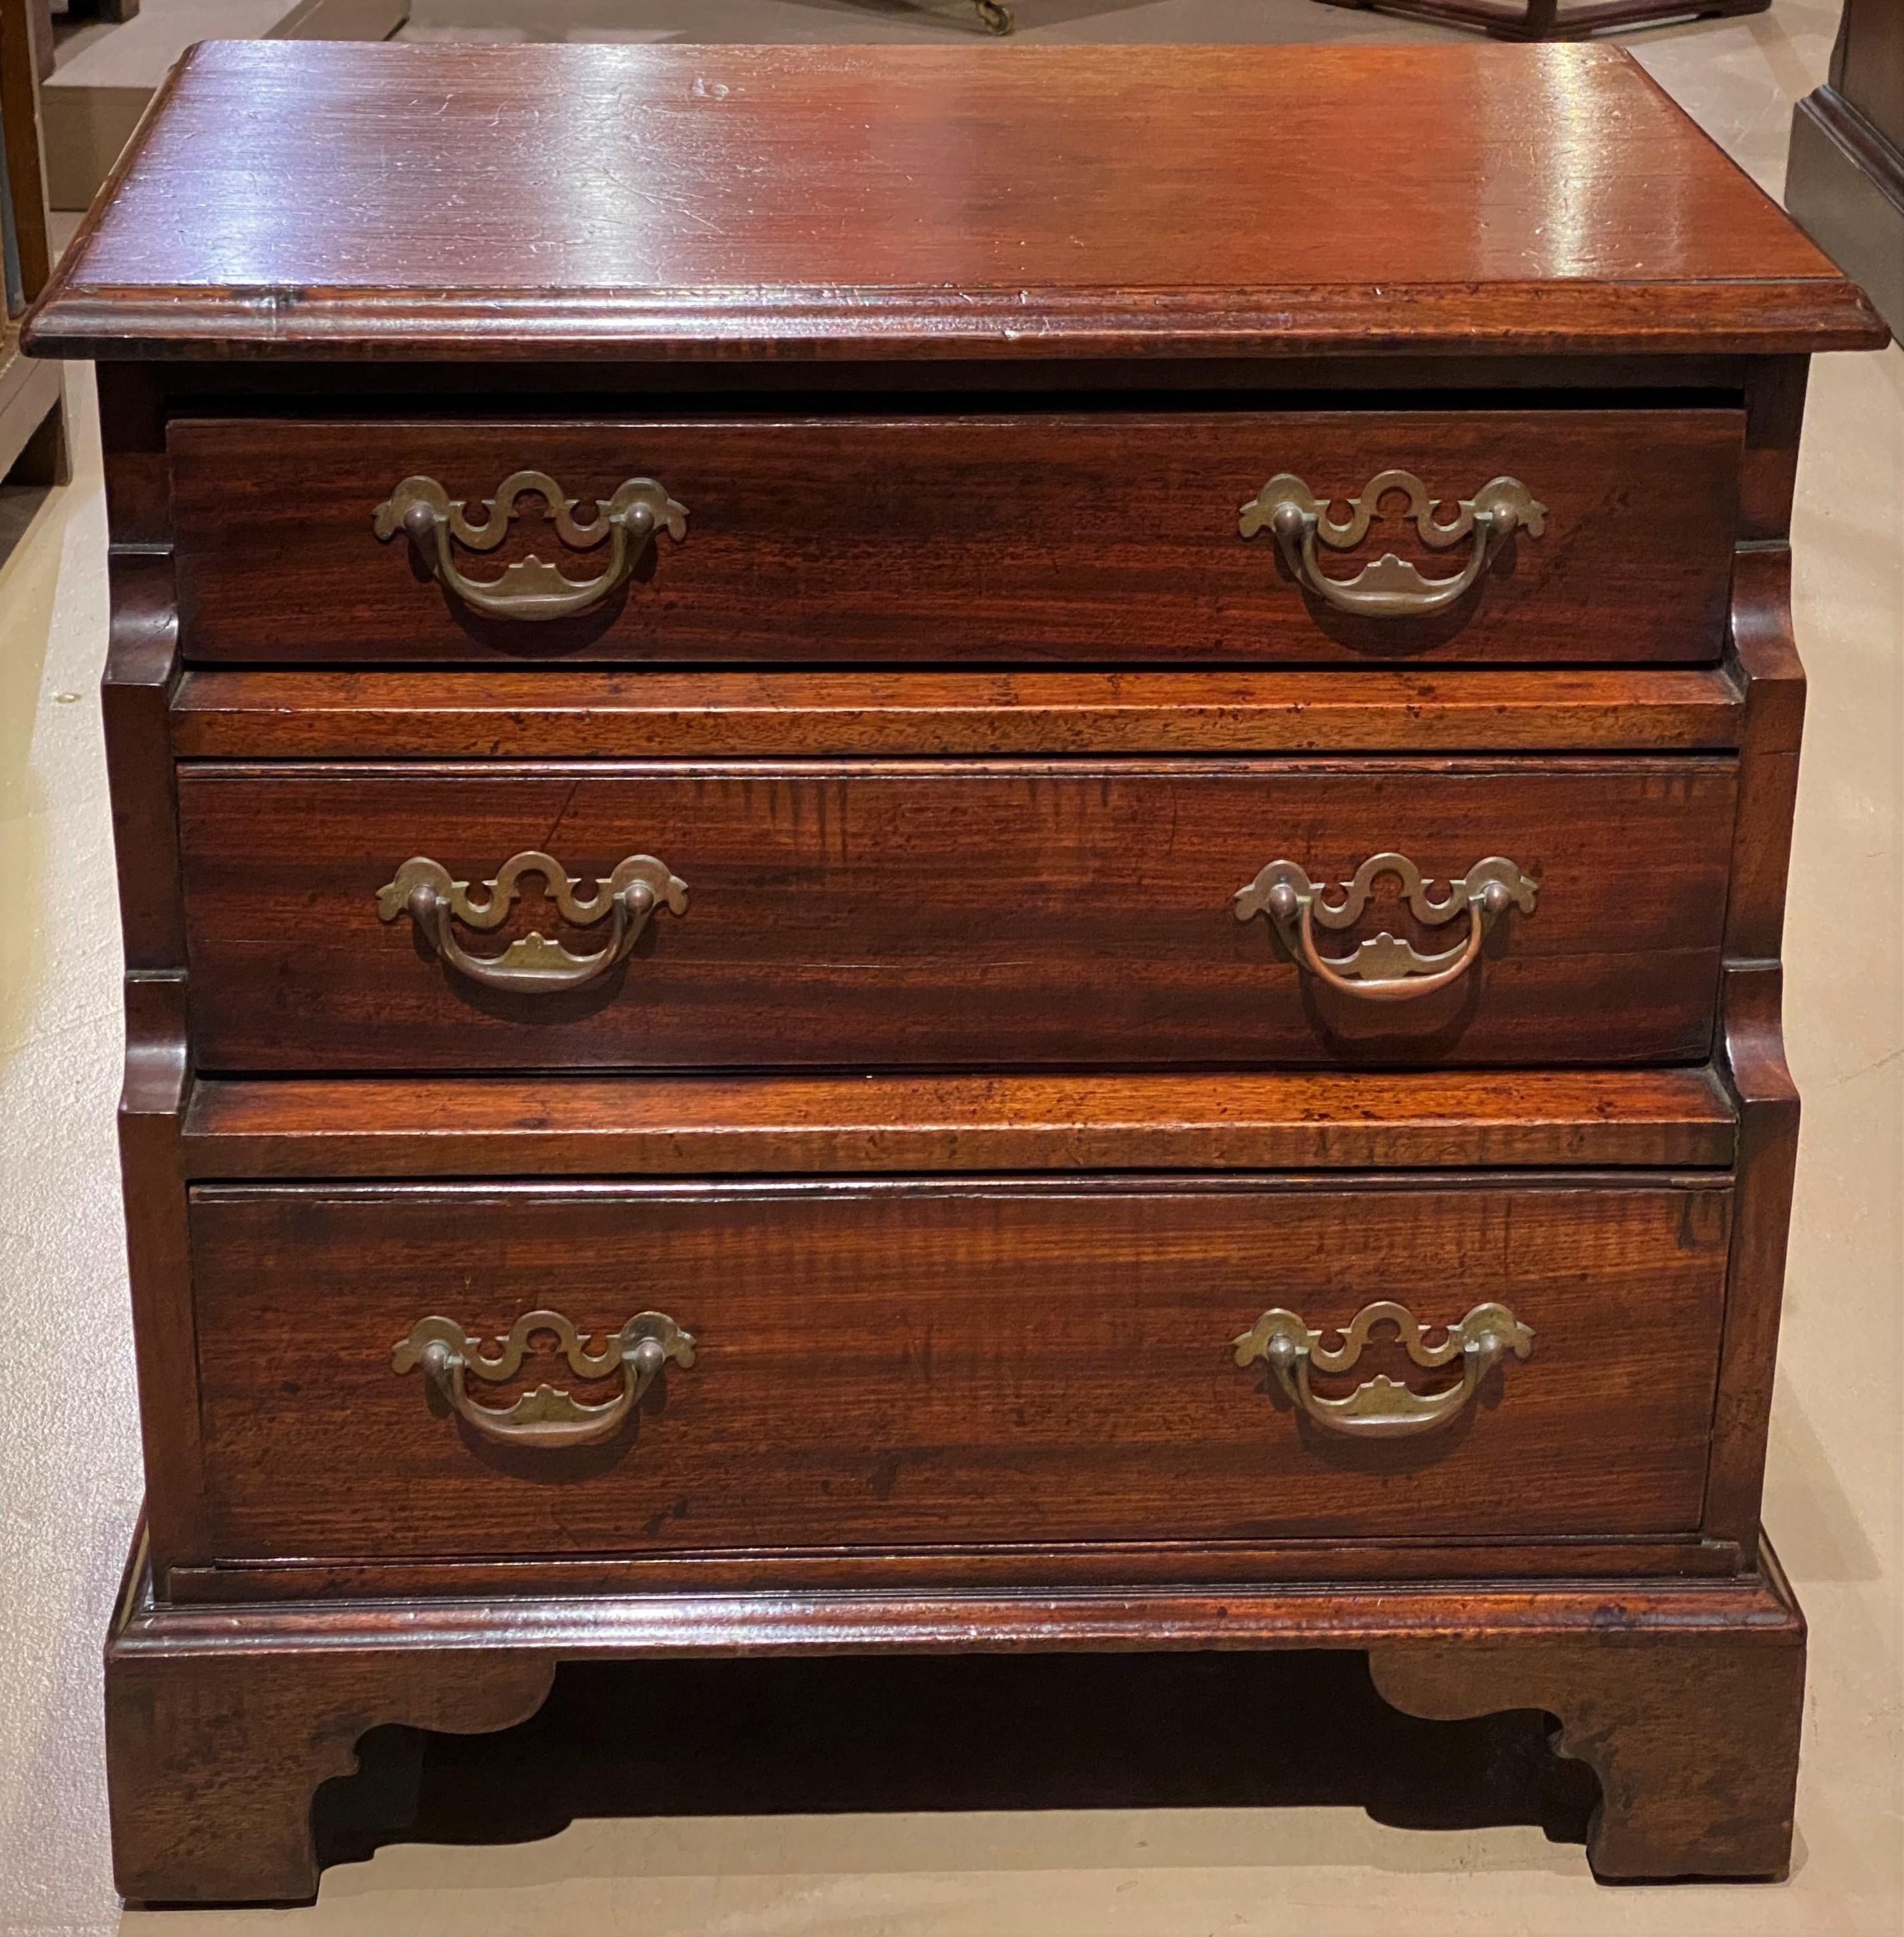 A fine diminutive English Chippendale style mahogany chest or side table with a rectangular molded edge top surmounting three graduated drawers on a nicely carved bracket base, with chamfered drawer bases, and great patina. Very good overall